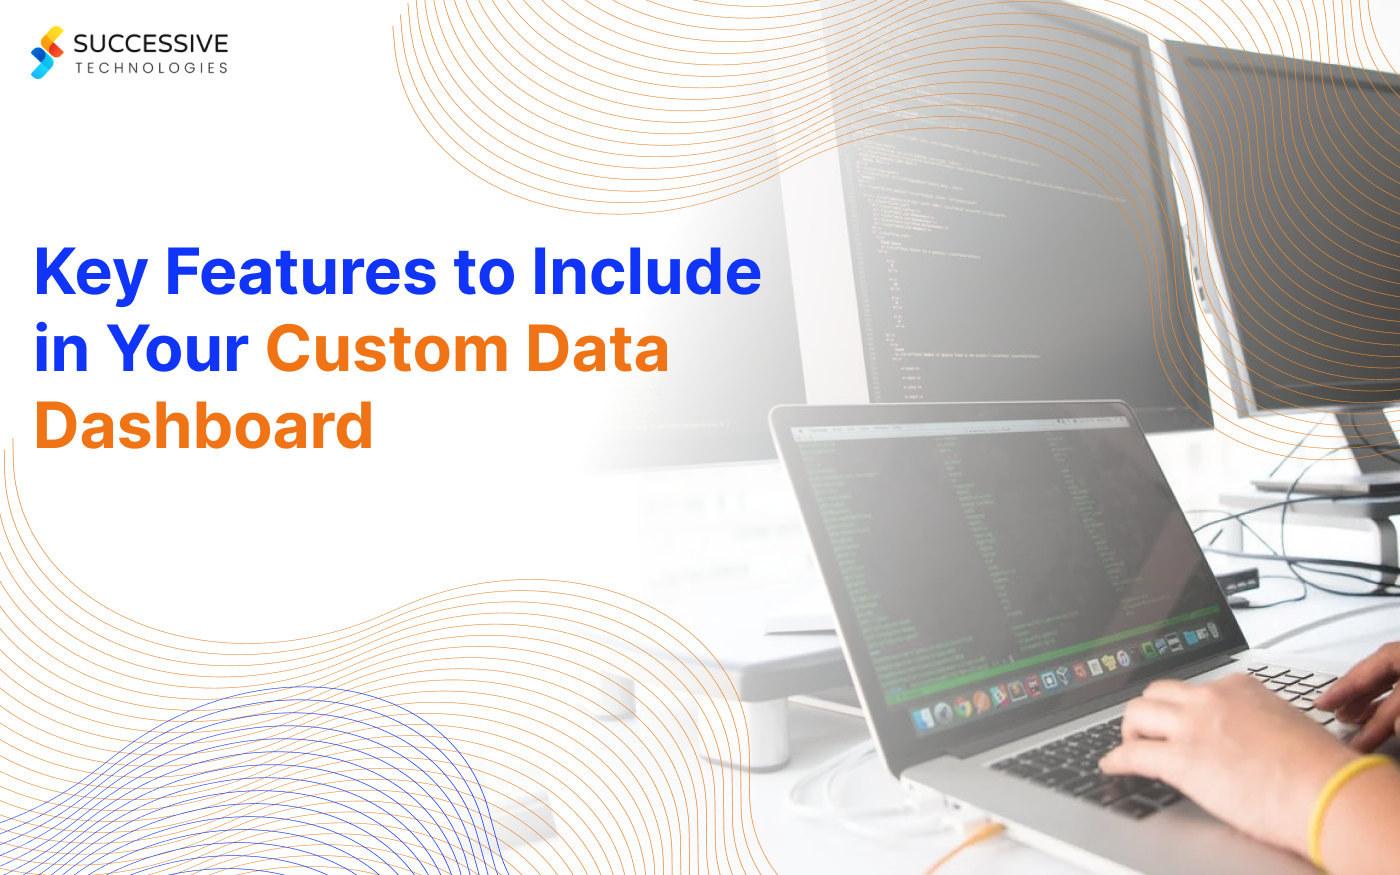 8 Key Features to Include in Your Custom Data Dashboard